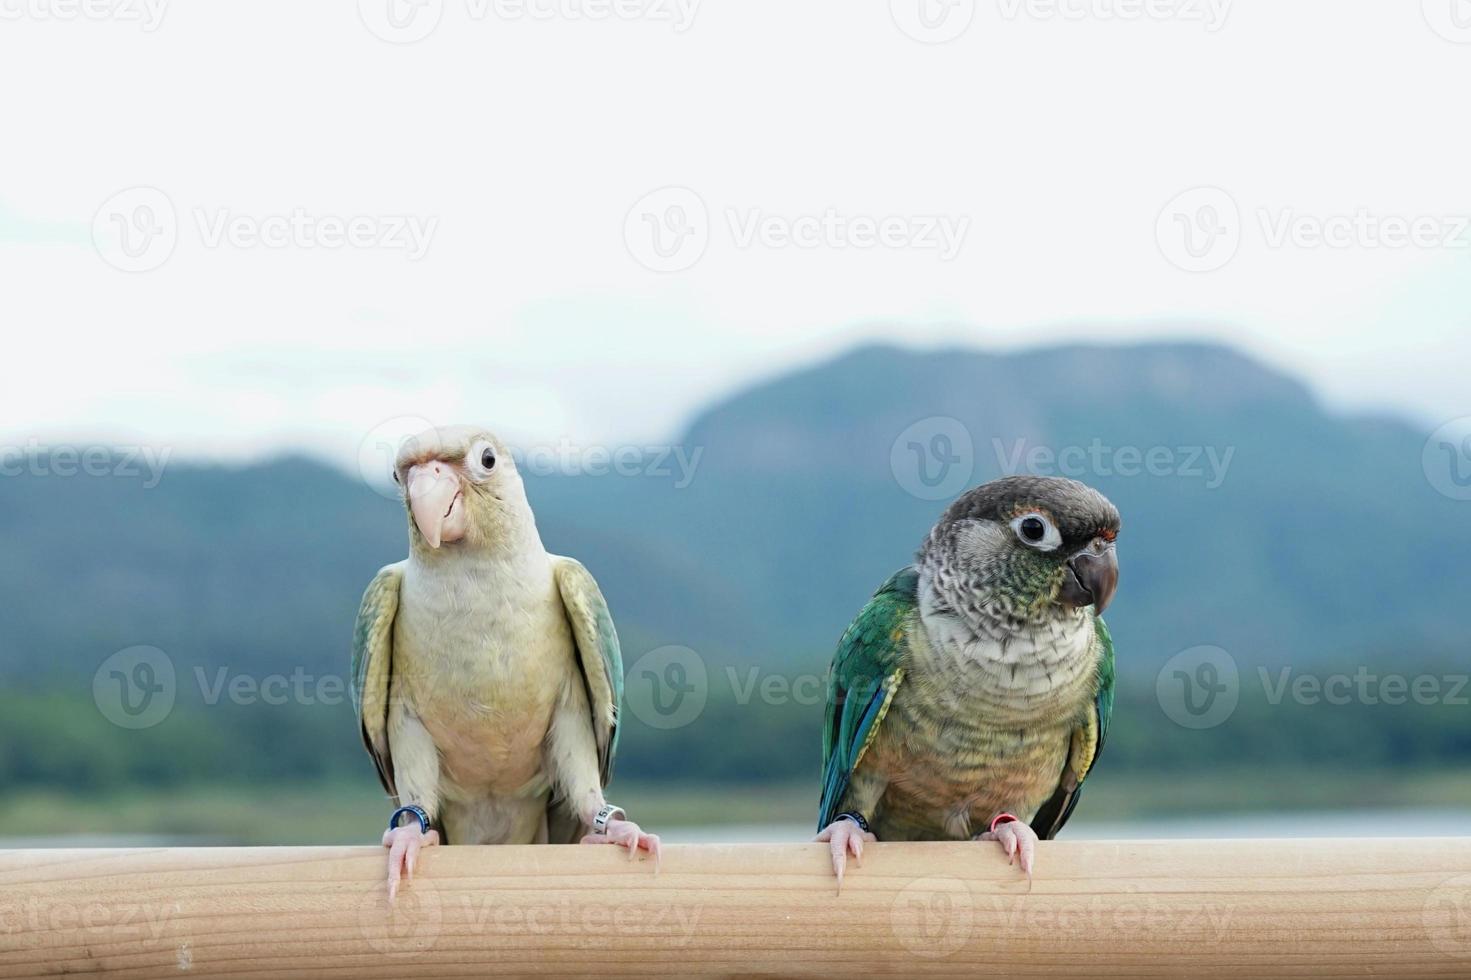 Two green cheek conure couple turquoise Yellow-sided and Pineapple color on sky and mountain background, the small parrot of the genus Pyrrhura, has a sharp beak. photo